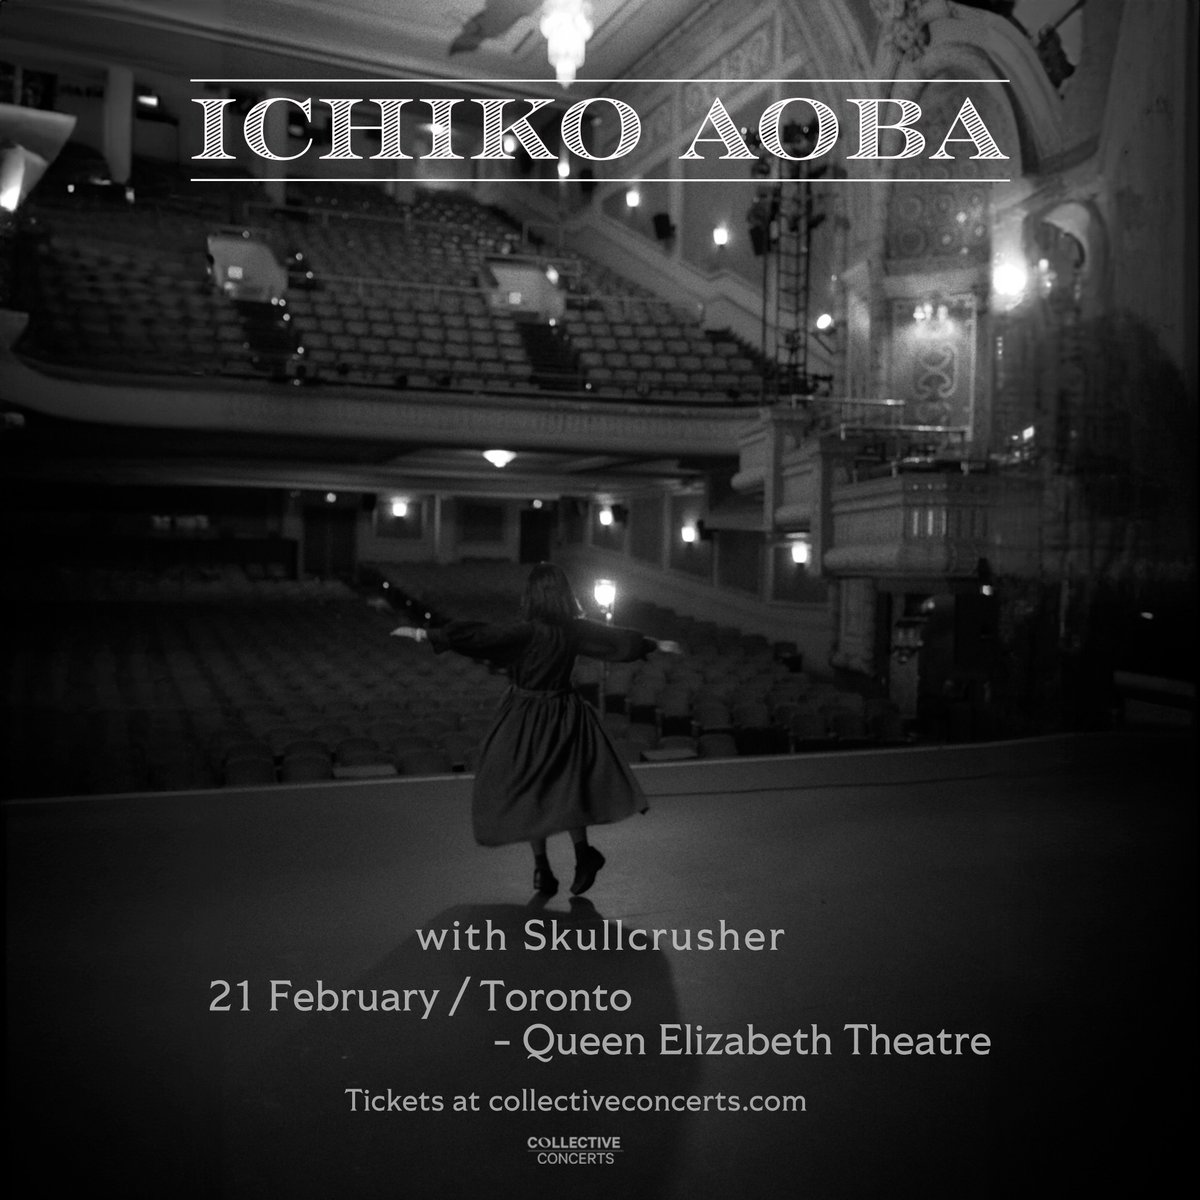 Joining @ichikoaoba at the Queen Elizabeth Theatre will be @im_skullcrusher! Limited tickets remain for what is sure to be a spectacular show, get yours today at collectiveconcerts.com